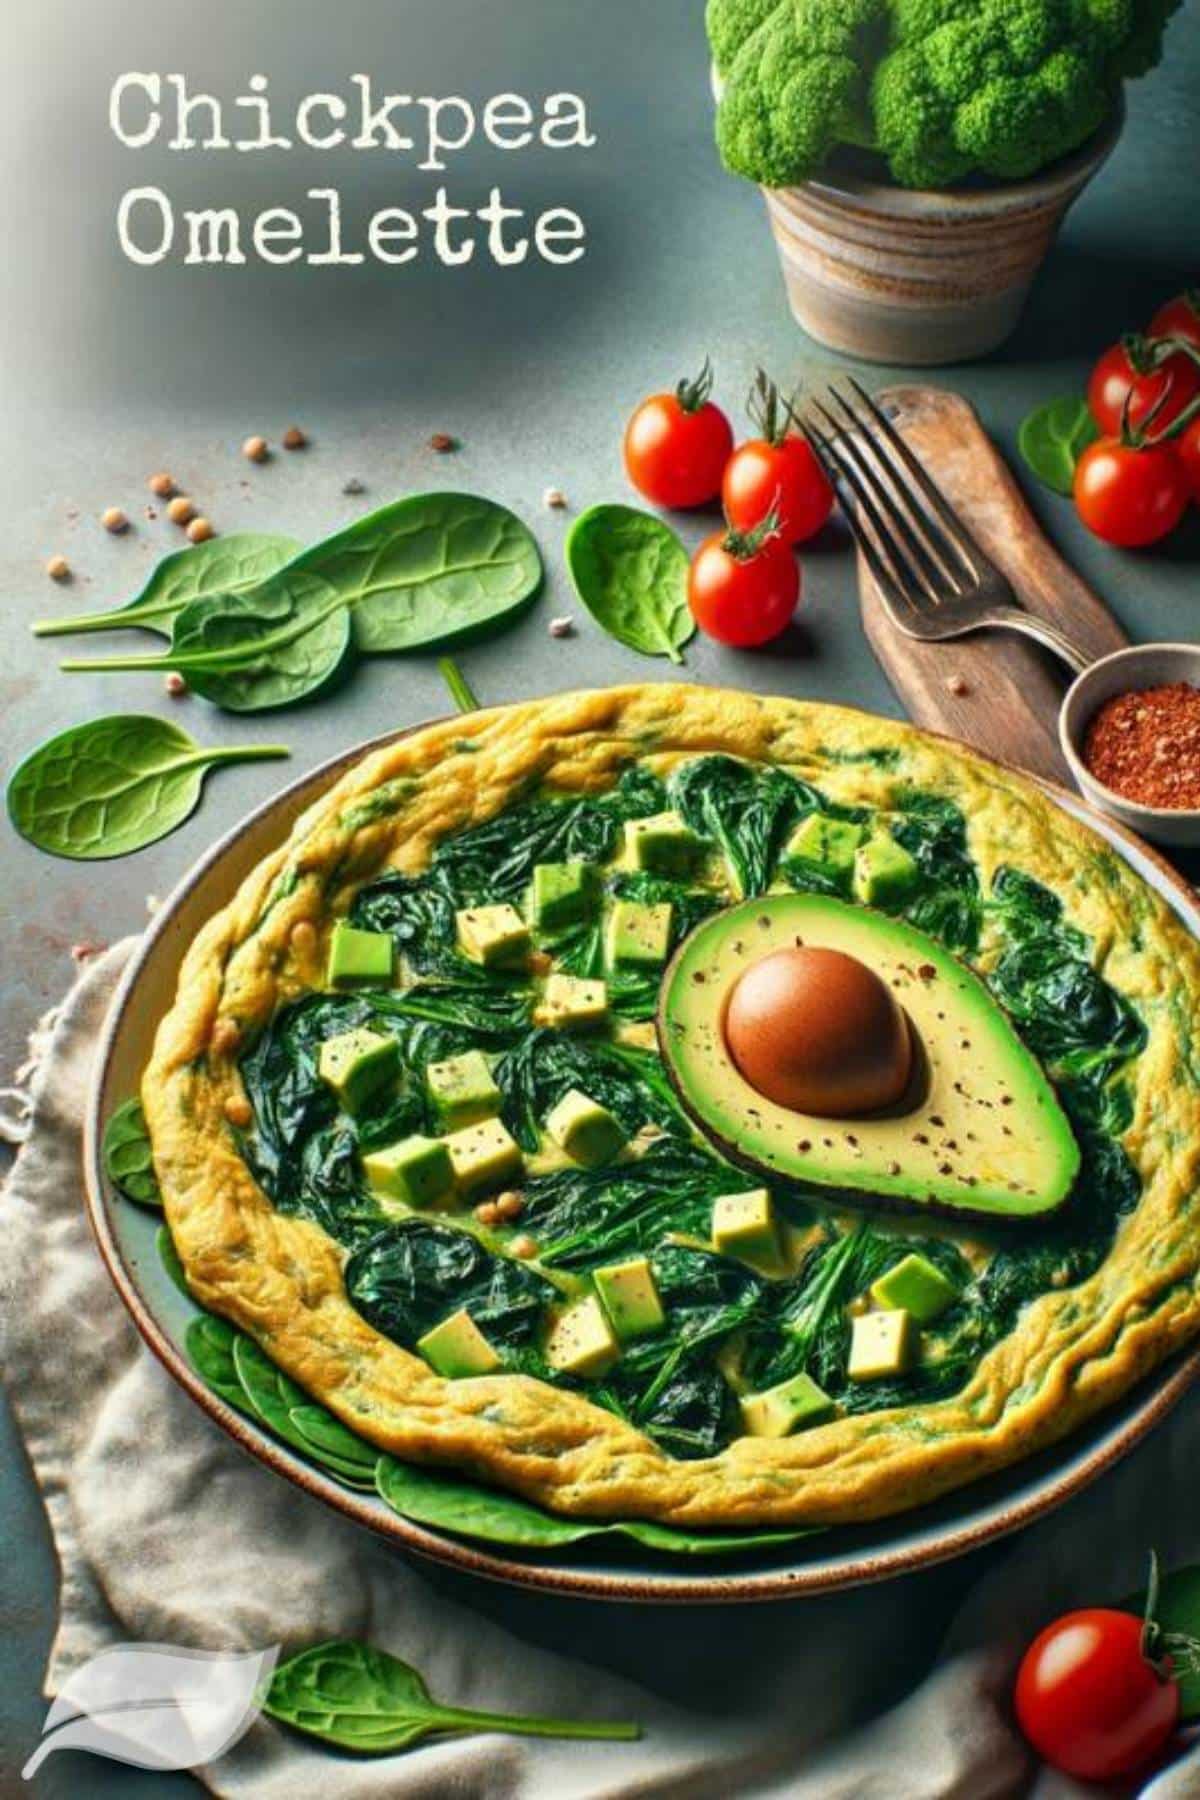 a vegan omelette made with chickpea flour